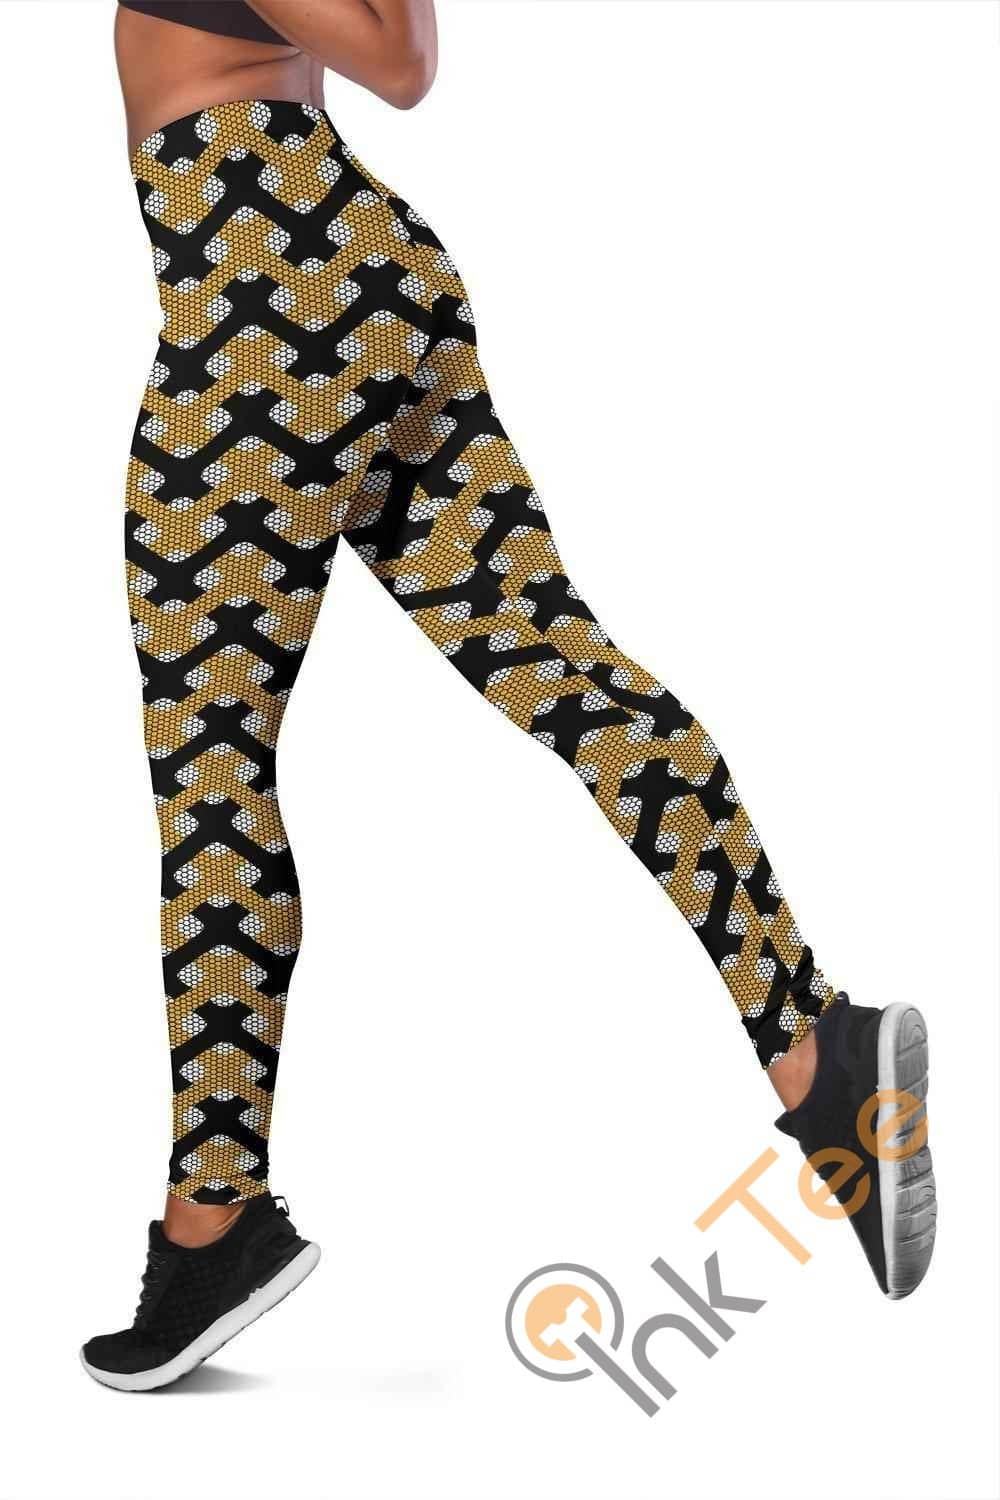 Inktee Store - Missouri Tigers Inspired 3D All Over Print For Yoga Fitness Fashion Women'S Leggings Image